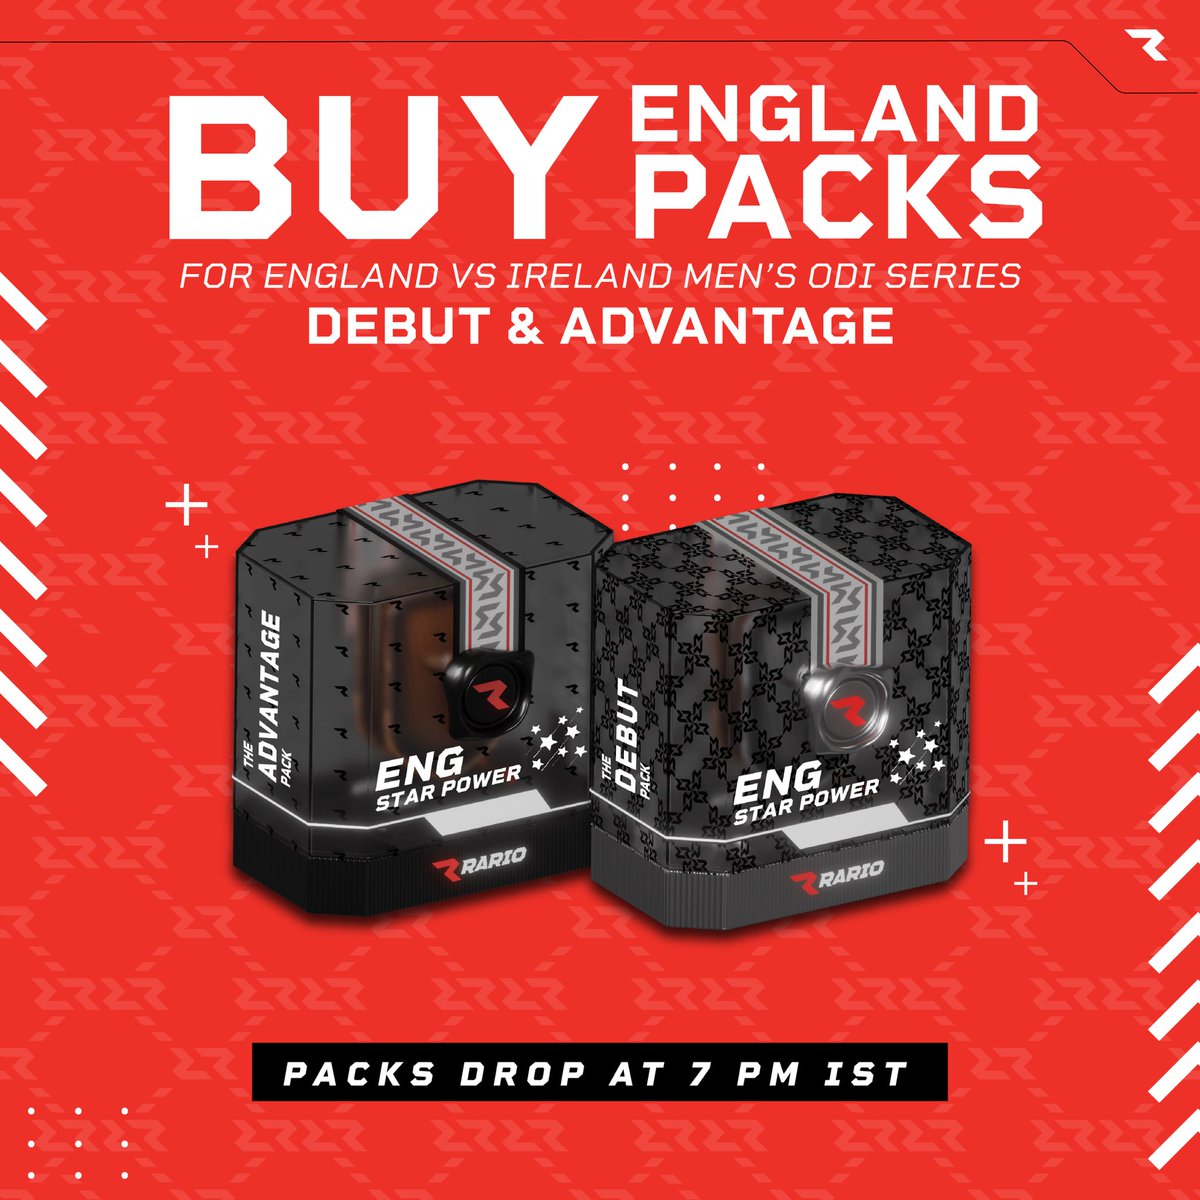 Get set for the ENG v IRE series! Own Cards of ENG players and build D3 teams to win exciting rewa₹ds! Start your own warmup on D3 and experiment with different combinations before the World Championship!